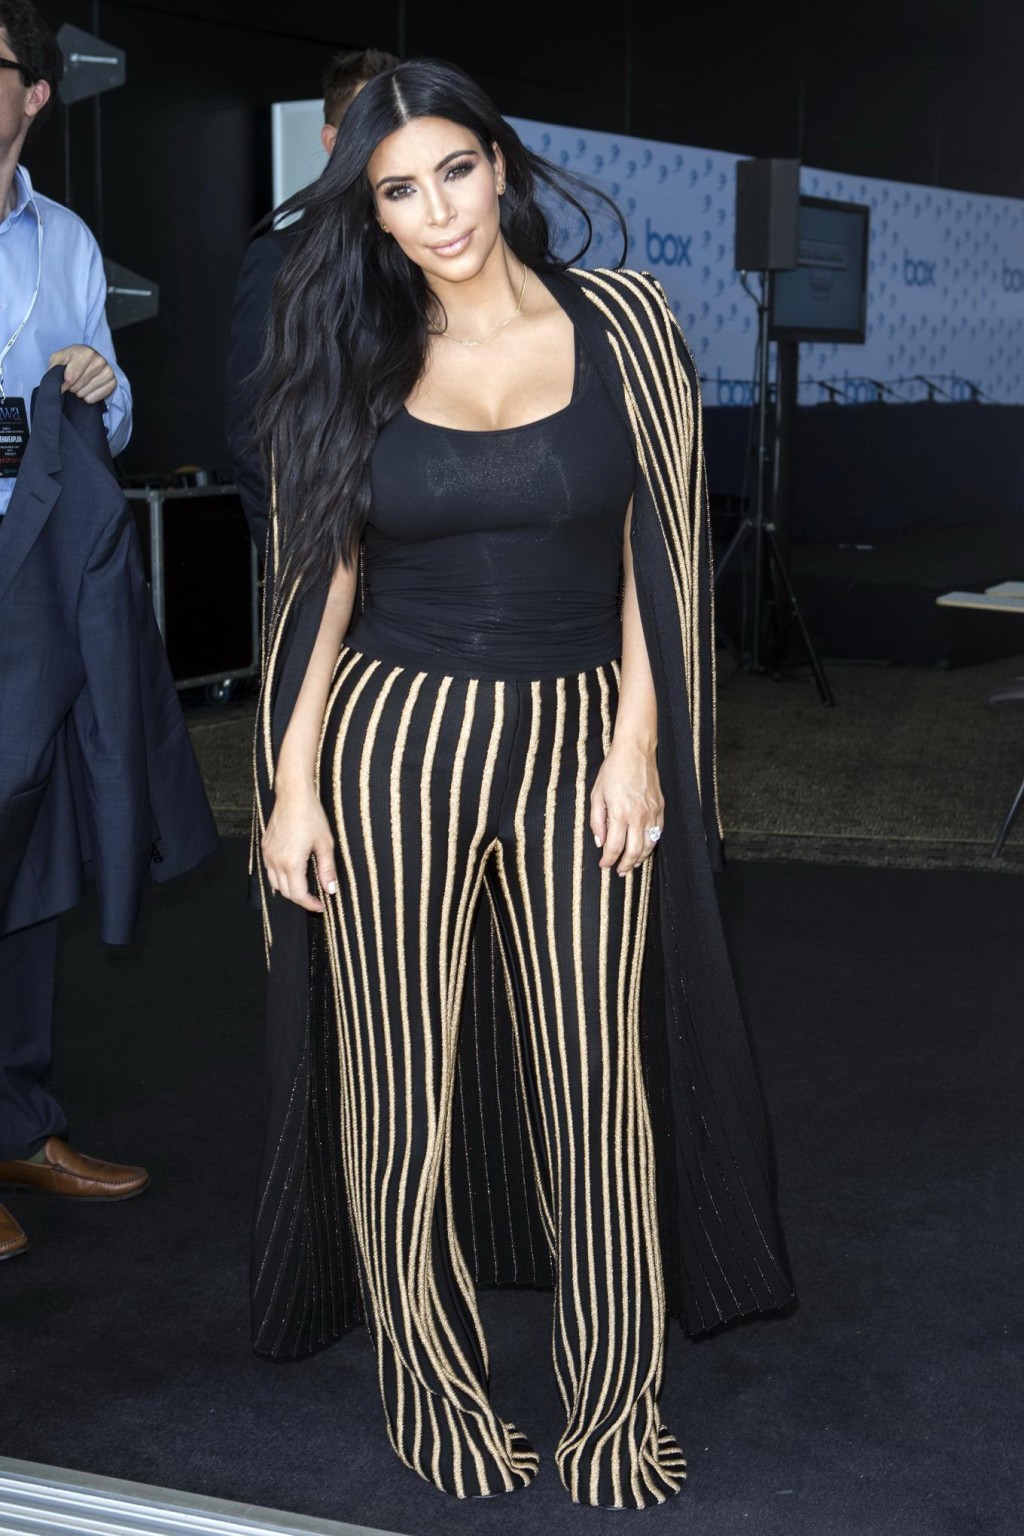 Kim Kardashian showing huge cleavage at the Cannes Lions event #75160386